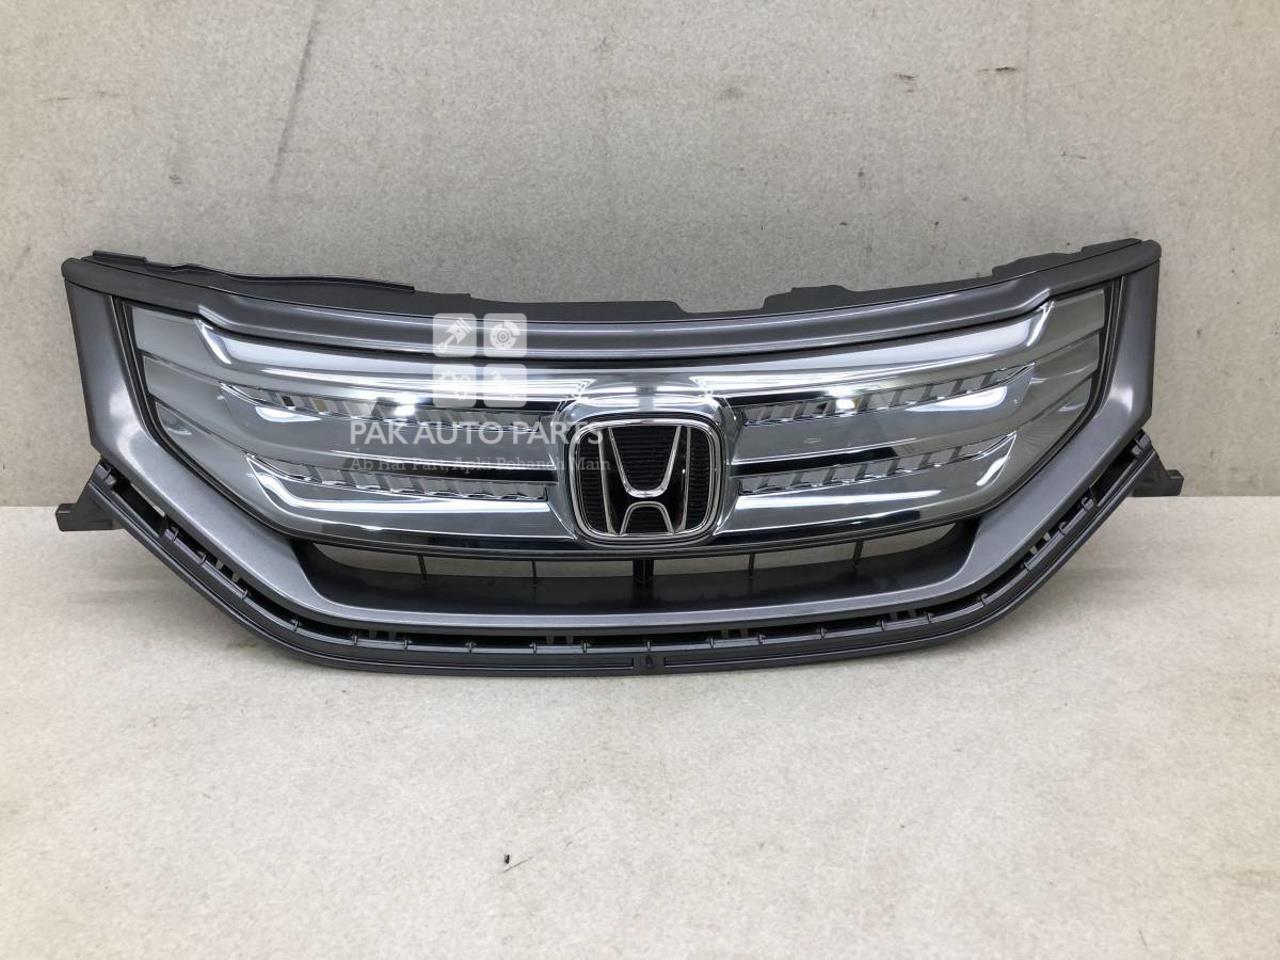 Picture of Honda Freed Grill